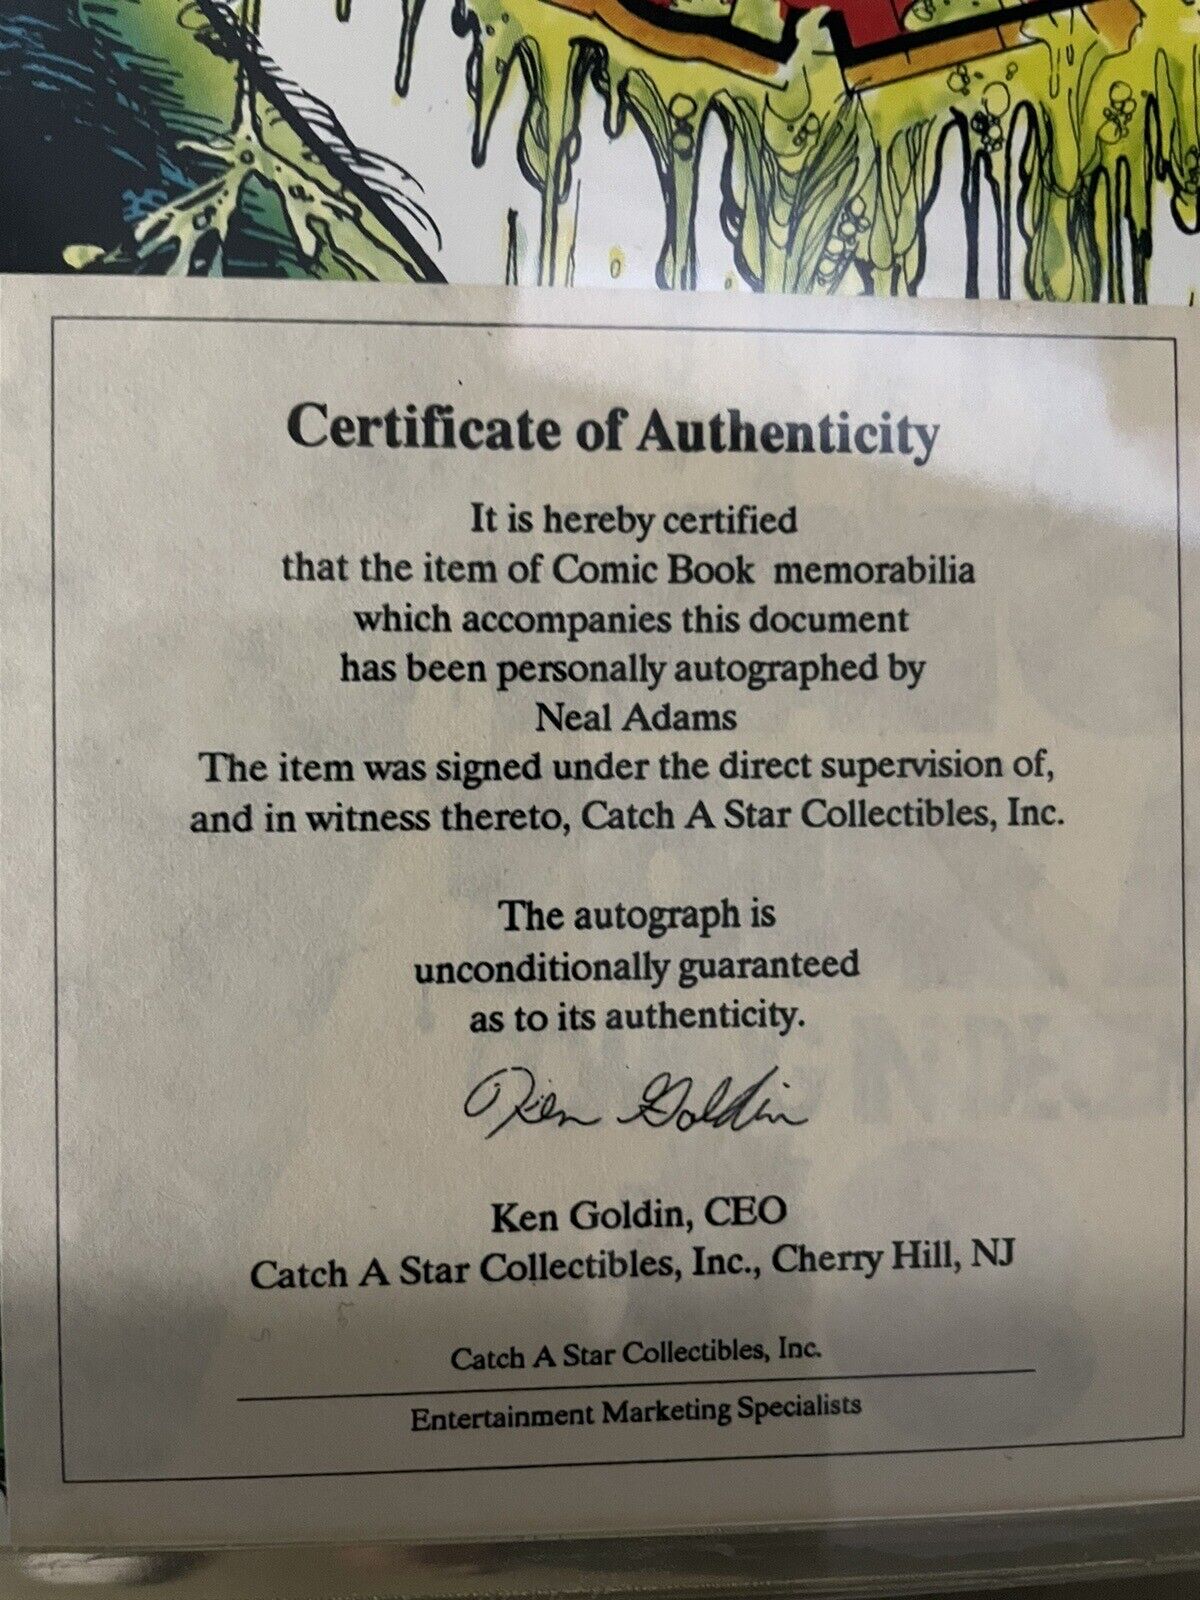 Crazy Man Comic Book For Sale Signed By Author… Certificate Of Authenticity